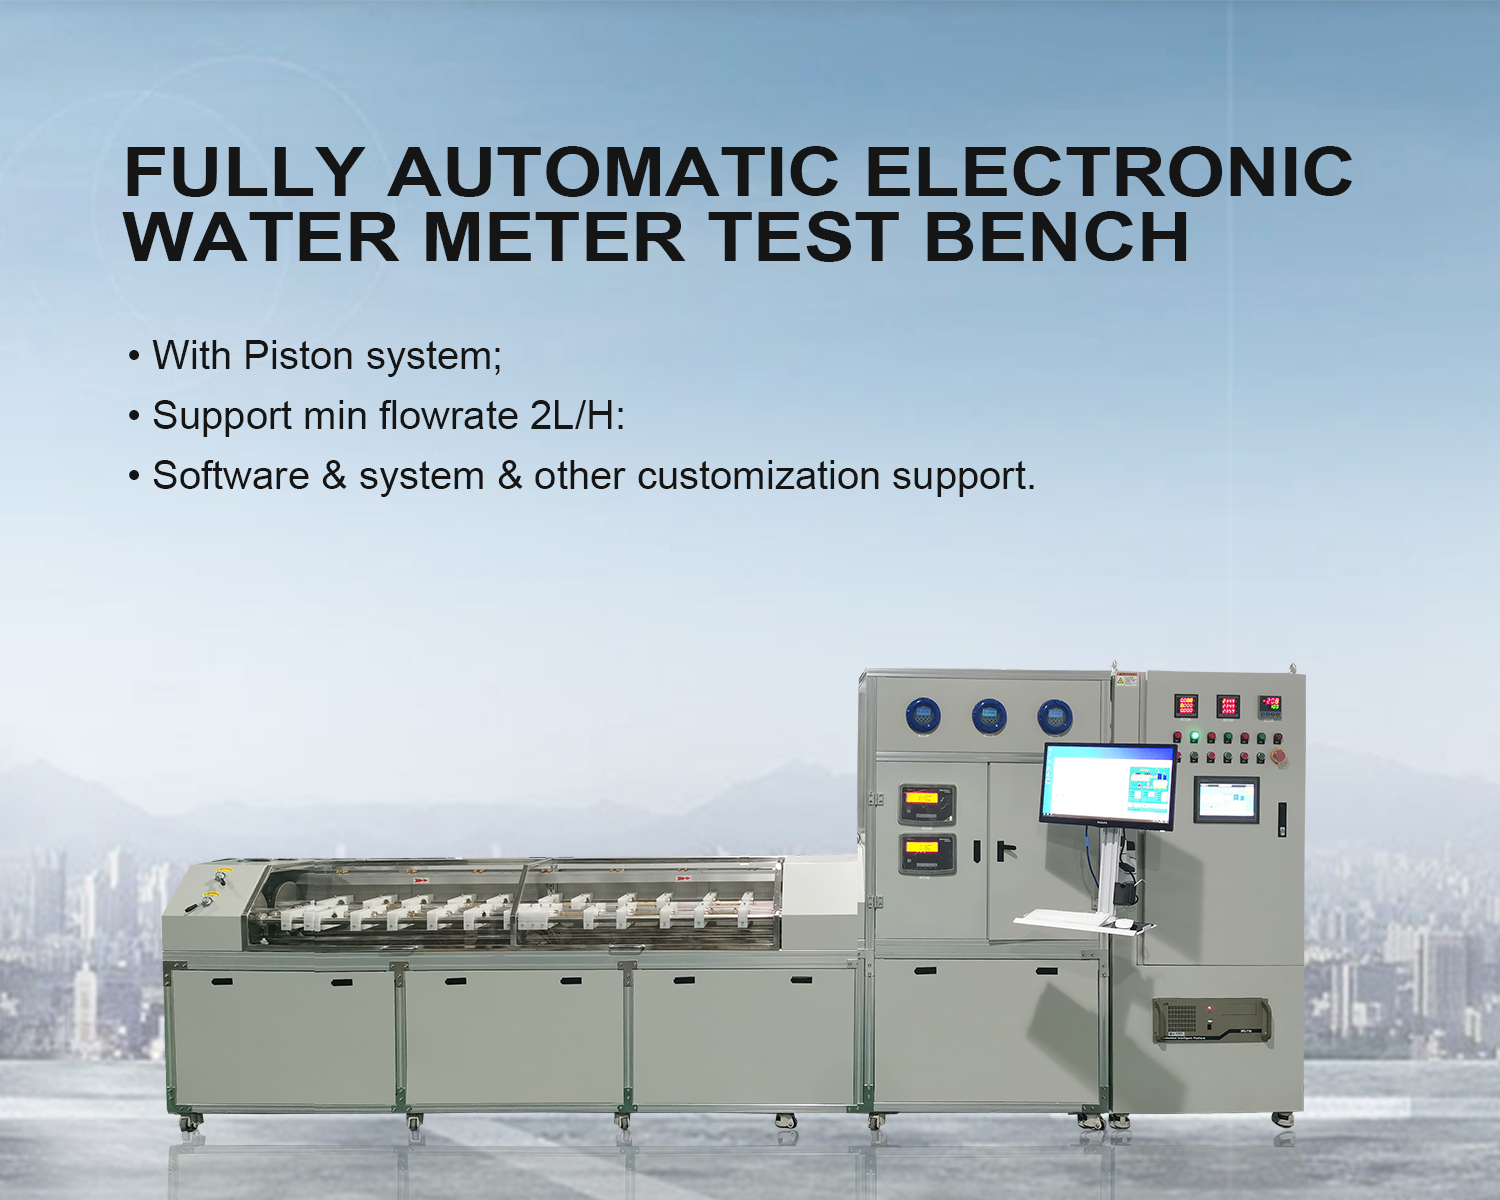 S.H.Meters: Your recommended supplier of fully automatic water meter test benches